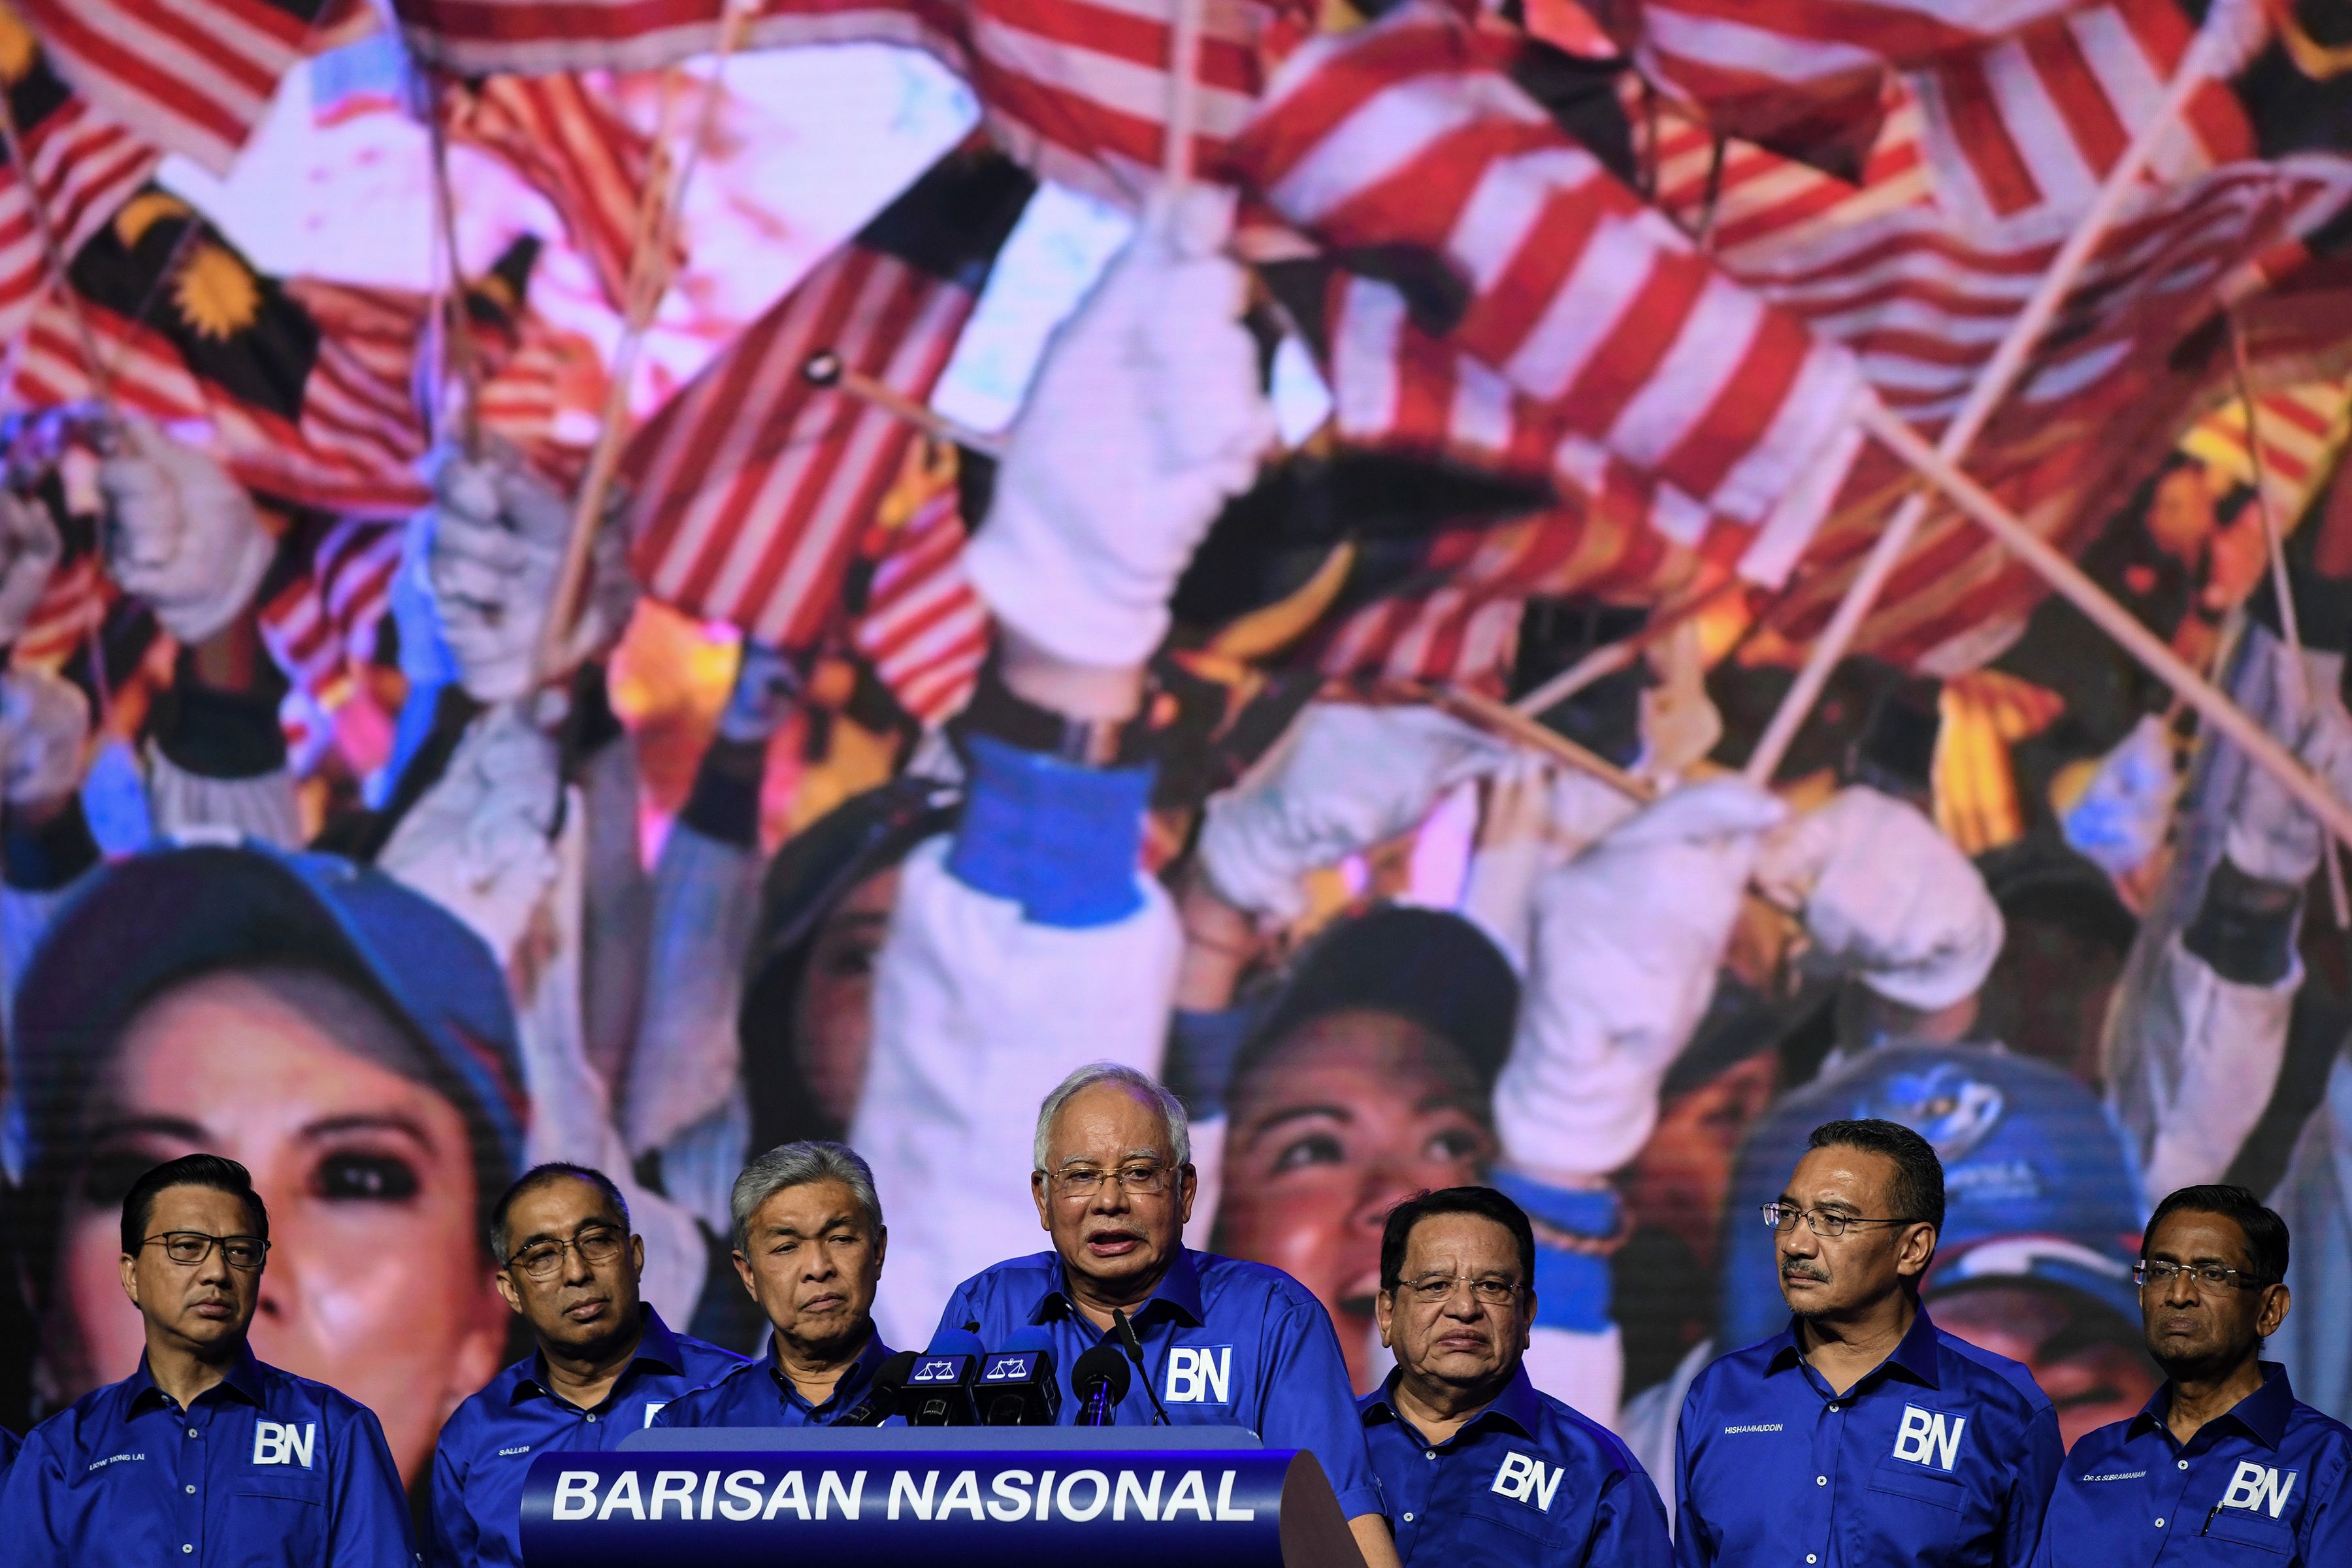 Malaysian Prime Minister Najib Razak before launching his coalition's election manifesto ahead of the upcoming polls during a National Front coalition or Barisan Nasional rally, in Kuala Lumpur on April 7, 2018. (Mohd Rasfan—AFP/Getty Images)